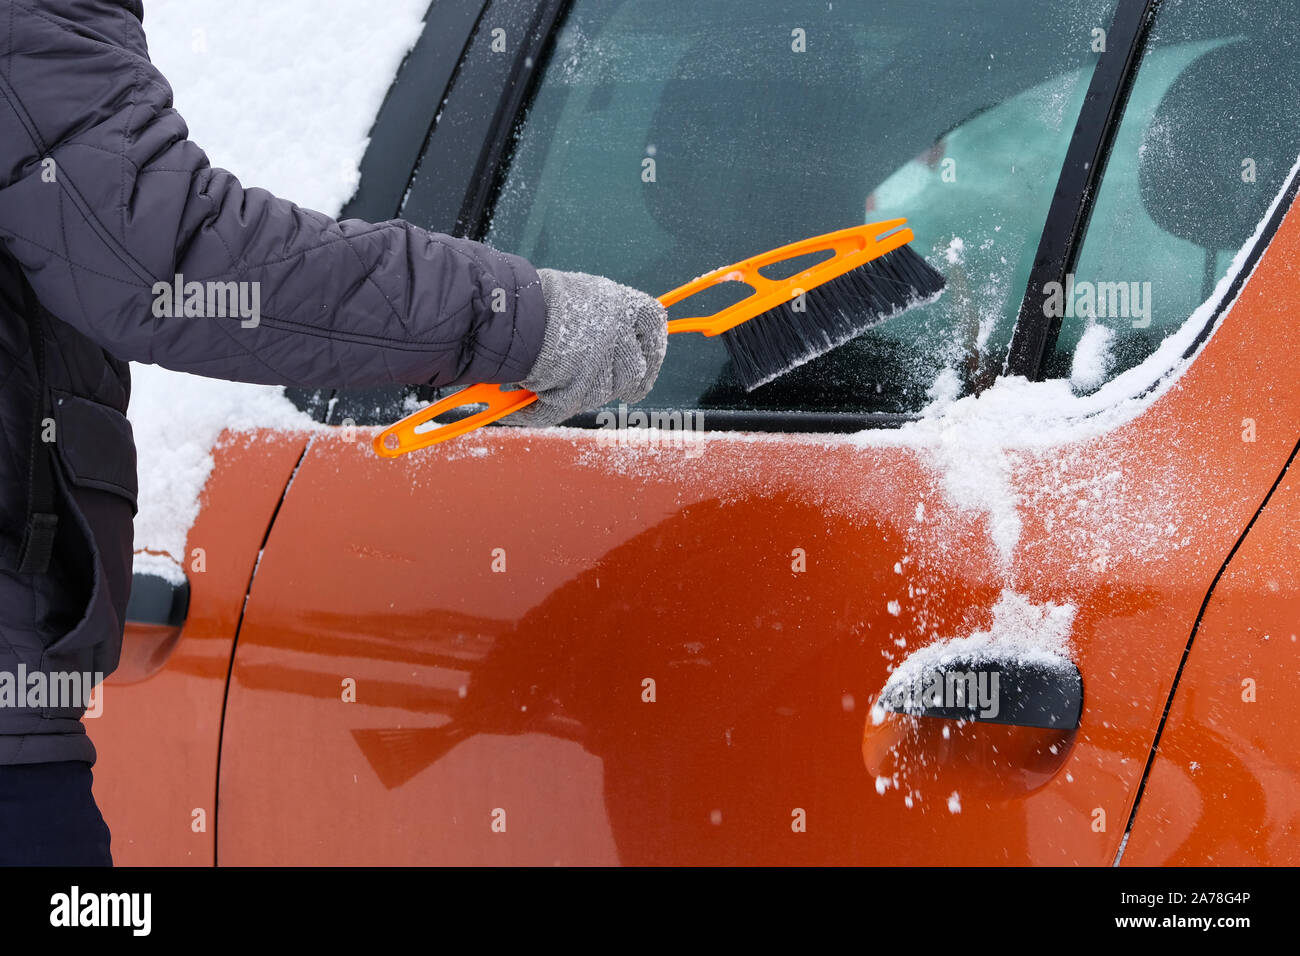 Car covered with snow. Man brushing and shoveling snow off car after snow storm. Brush in mans hand. Stock Photo